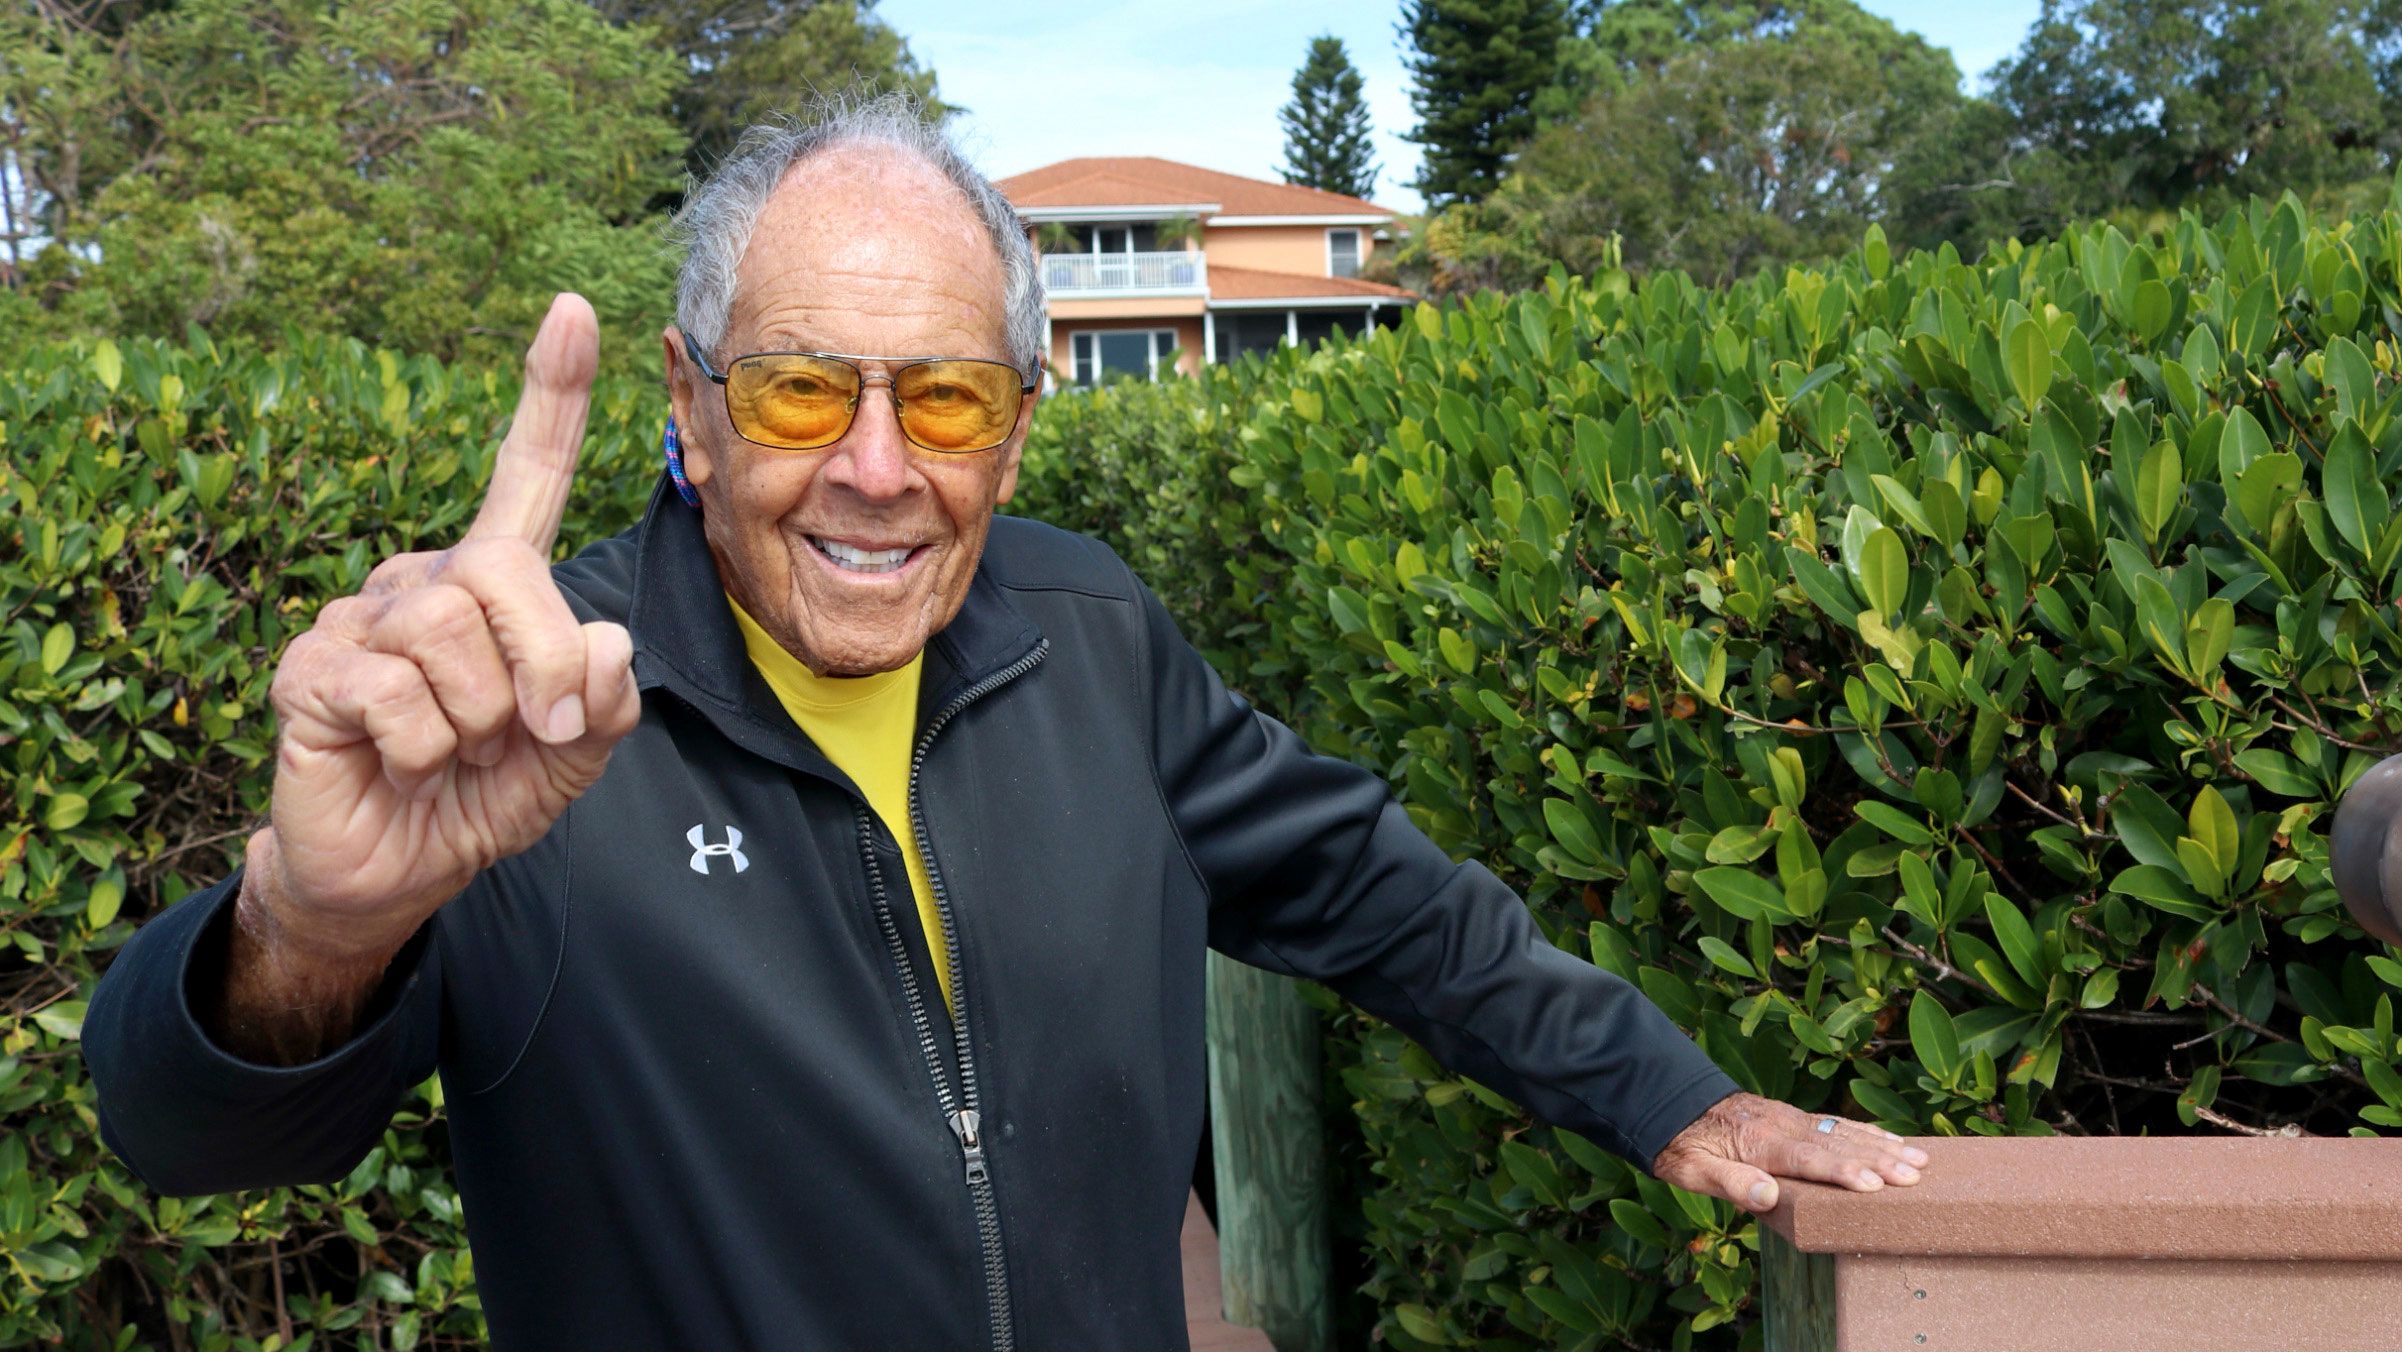 <a href="https://www.cnn.com/2022/12/05/tennis/nick-bollettieri-death-tennis-coach-spt-intl/index.html" target="_blank">Nick Bollettieri,</a> the famed tennis coach who taught the likes of the Williams sisters, Andre Agassi and Maria Sharapova, died at the age of 91, the IMG Academy confirmed on December 5.